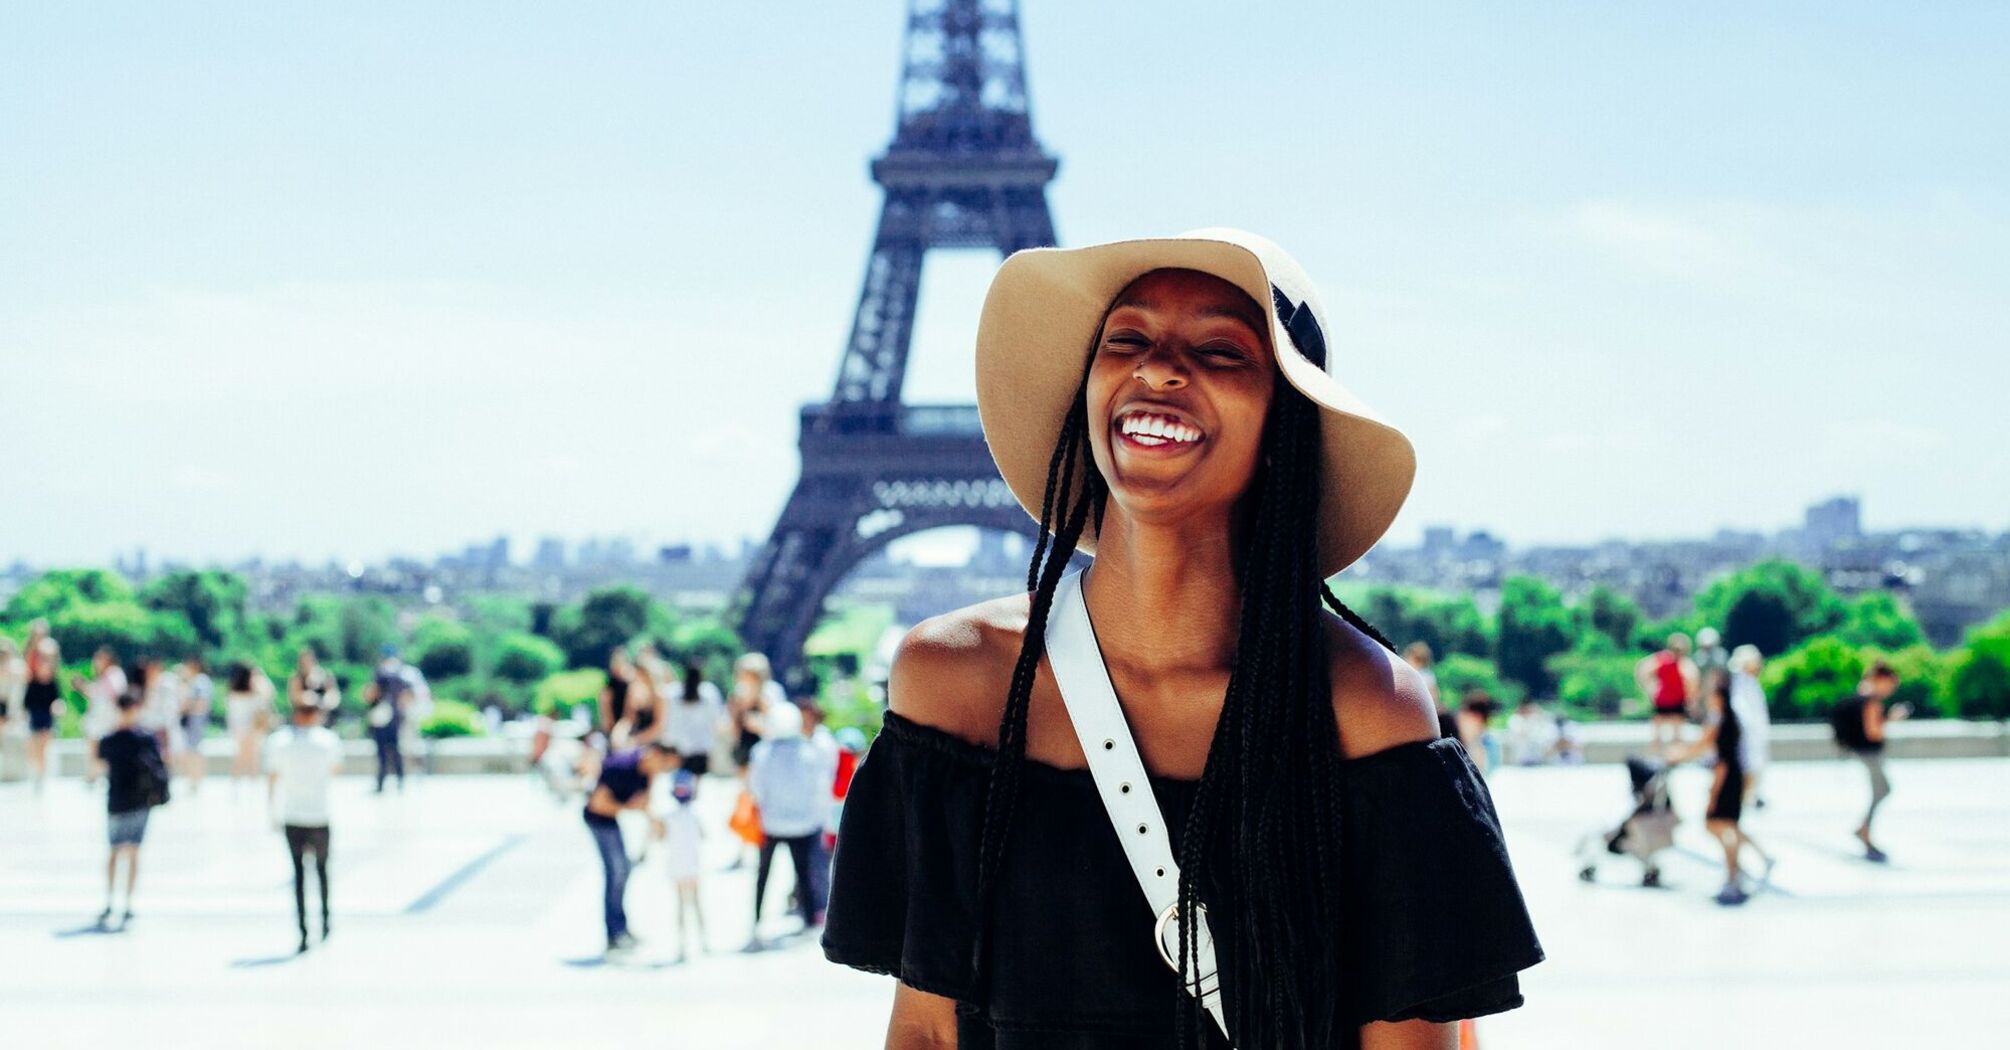 Smiling woman in front of the Eiffel Tower